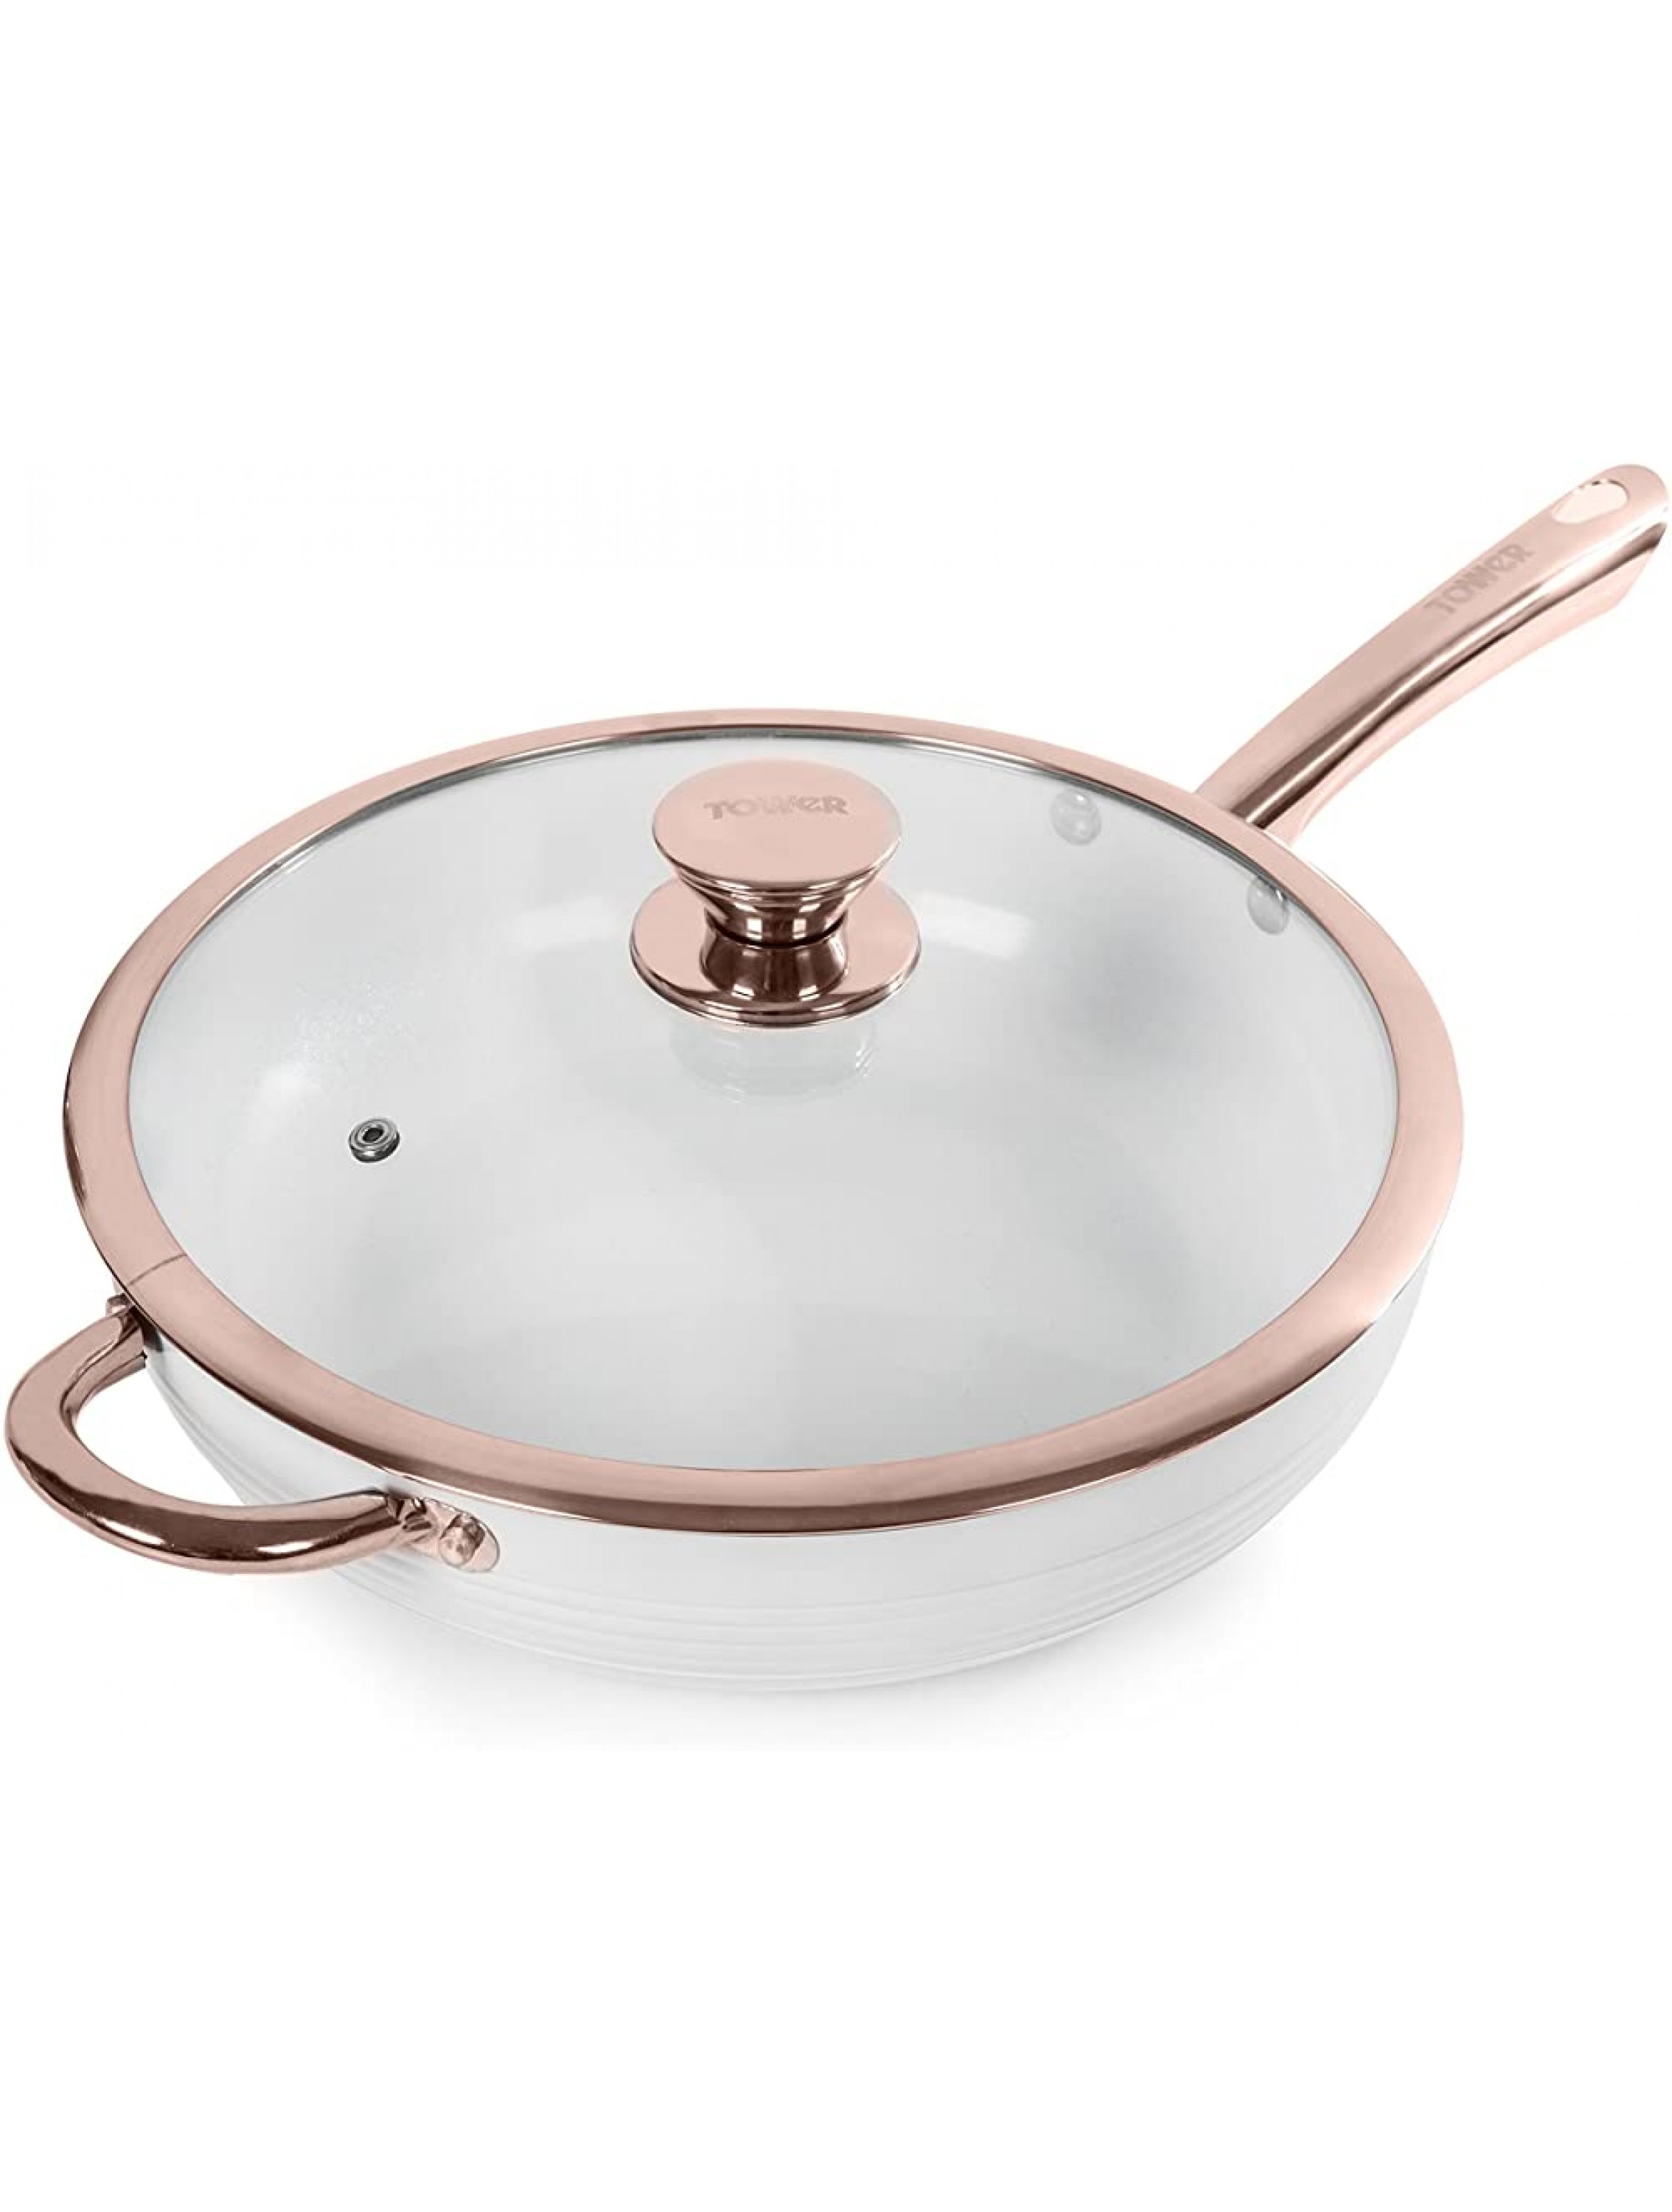 TOWER Linear Saute Pan with Easy Clean Non-Stick Ceramic Coating Aluminium White and Rose Gold 28 cm - BGQCO9TWV